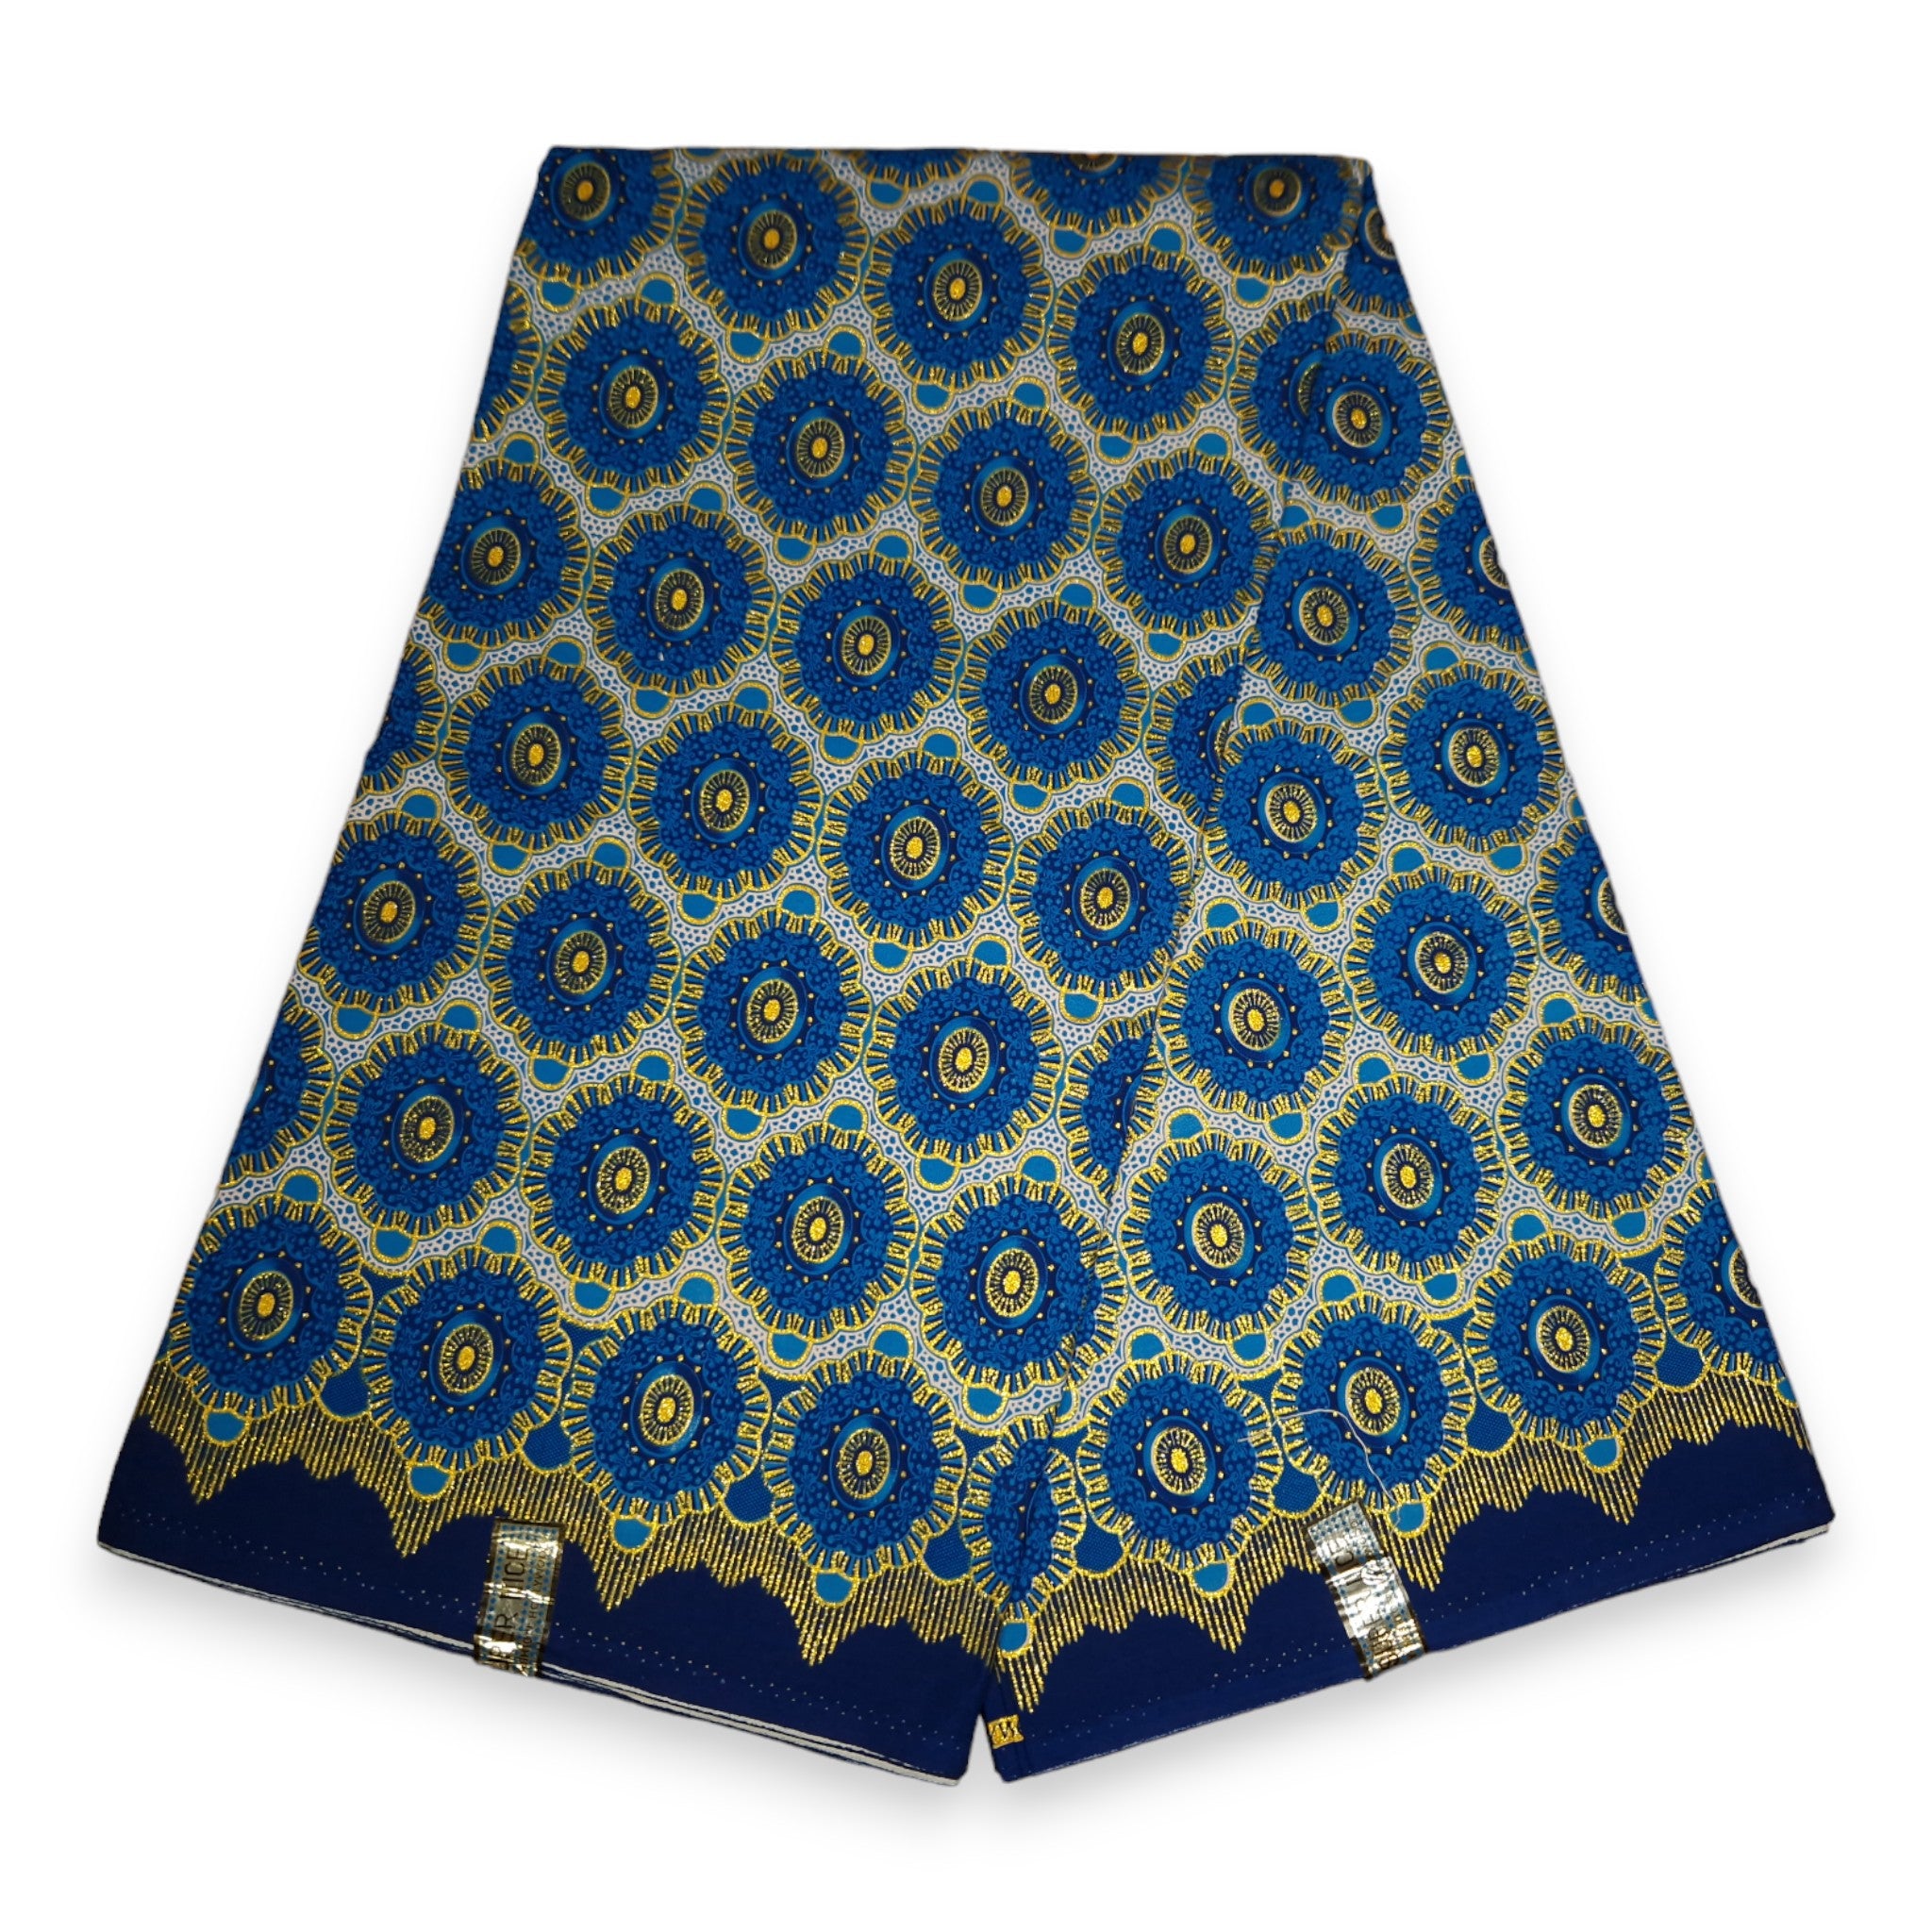 African print fabric - Exclusive Embellished Glitter effects 100% cotton - KT-3105 Gold Blue